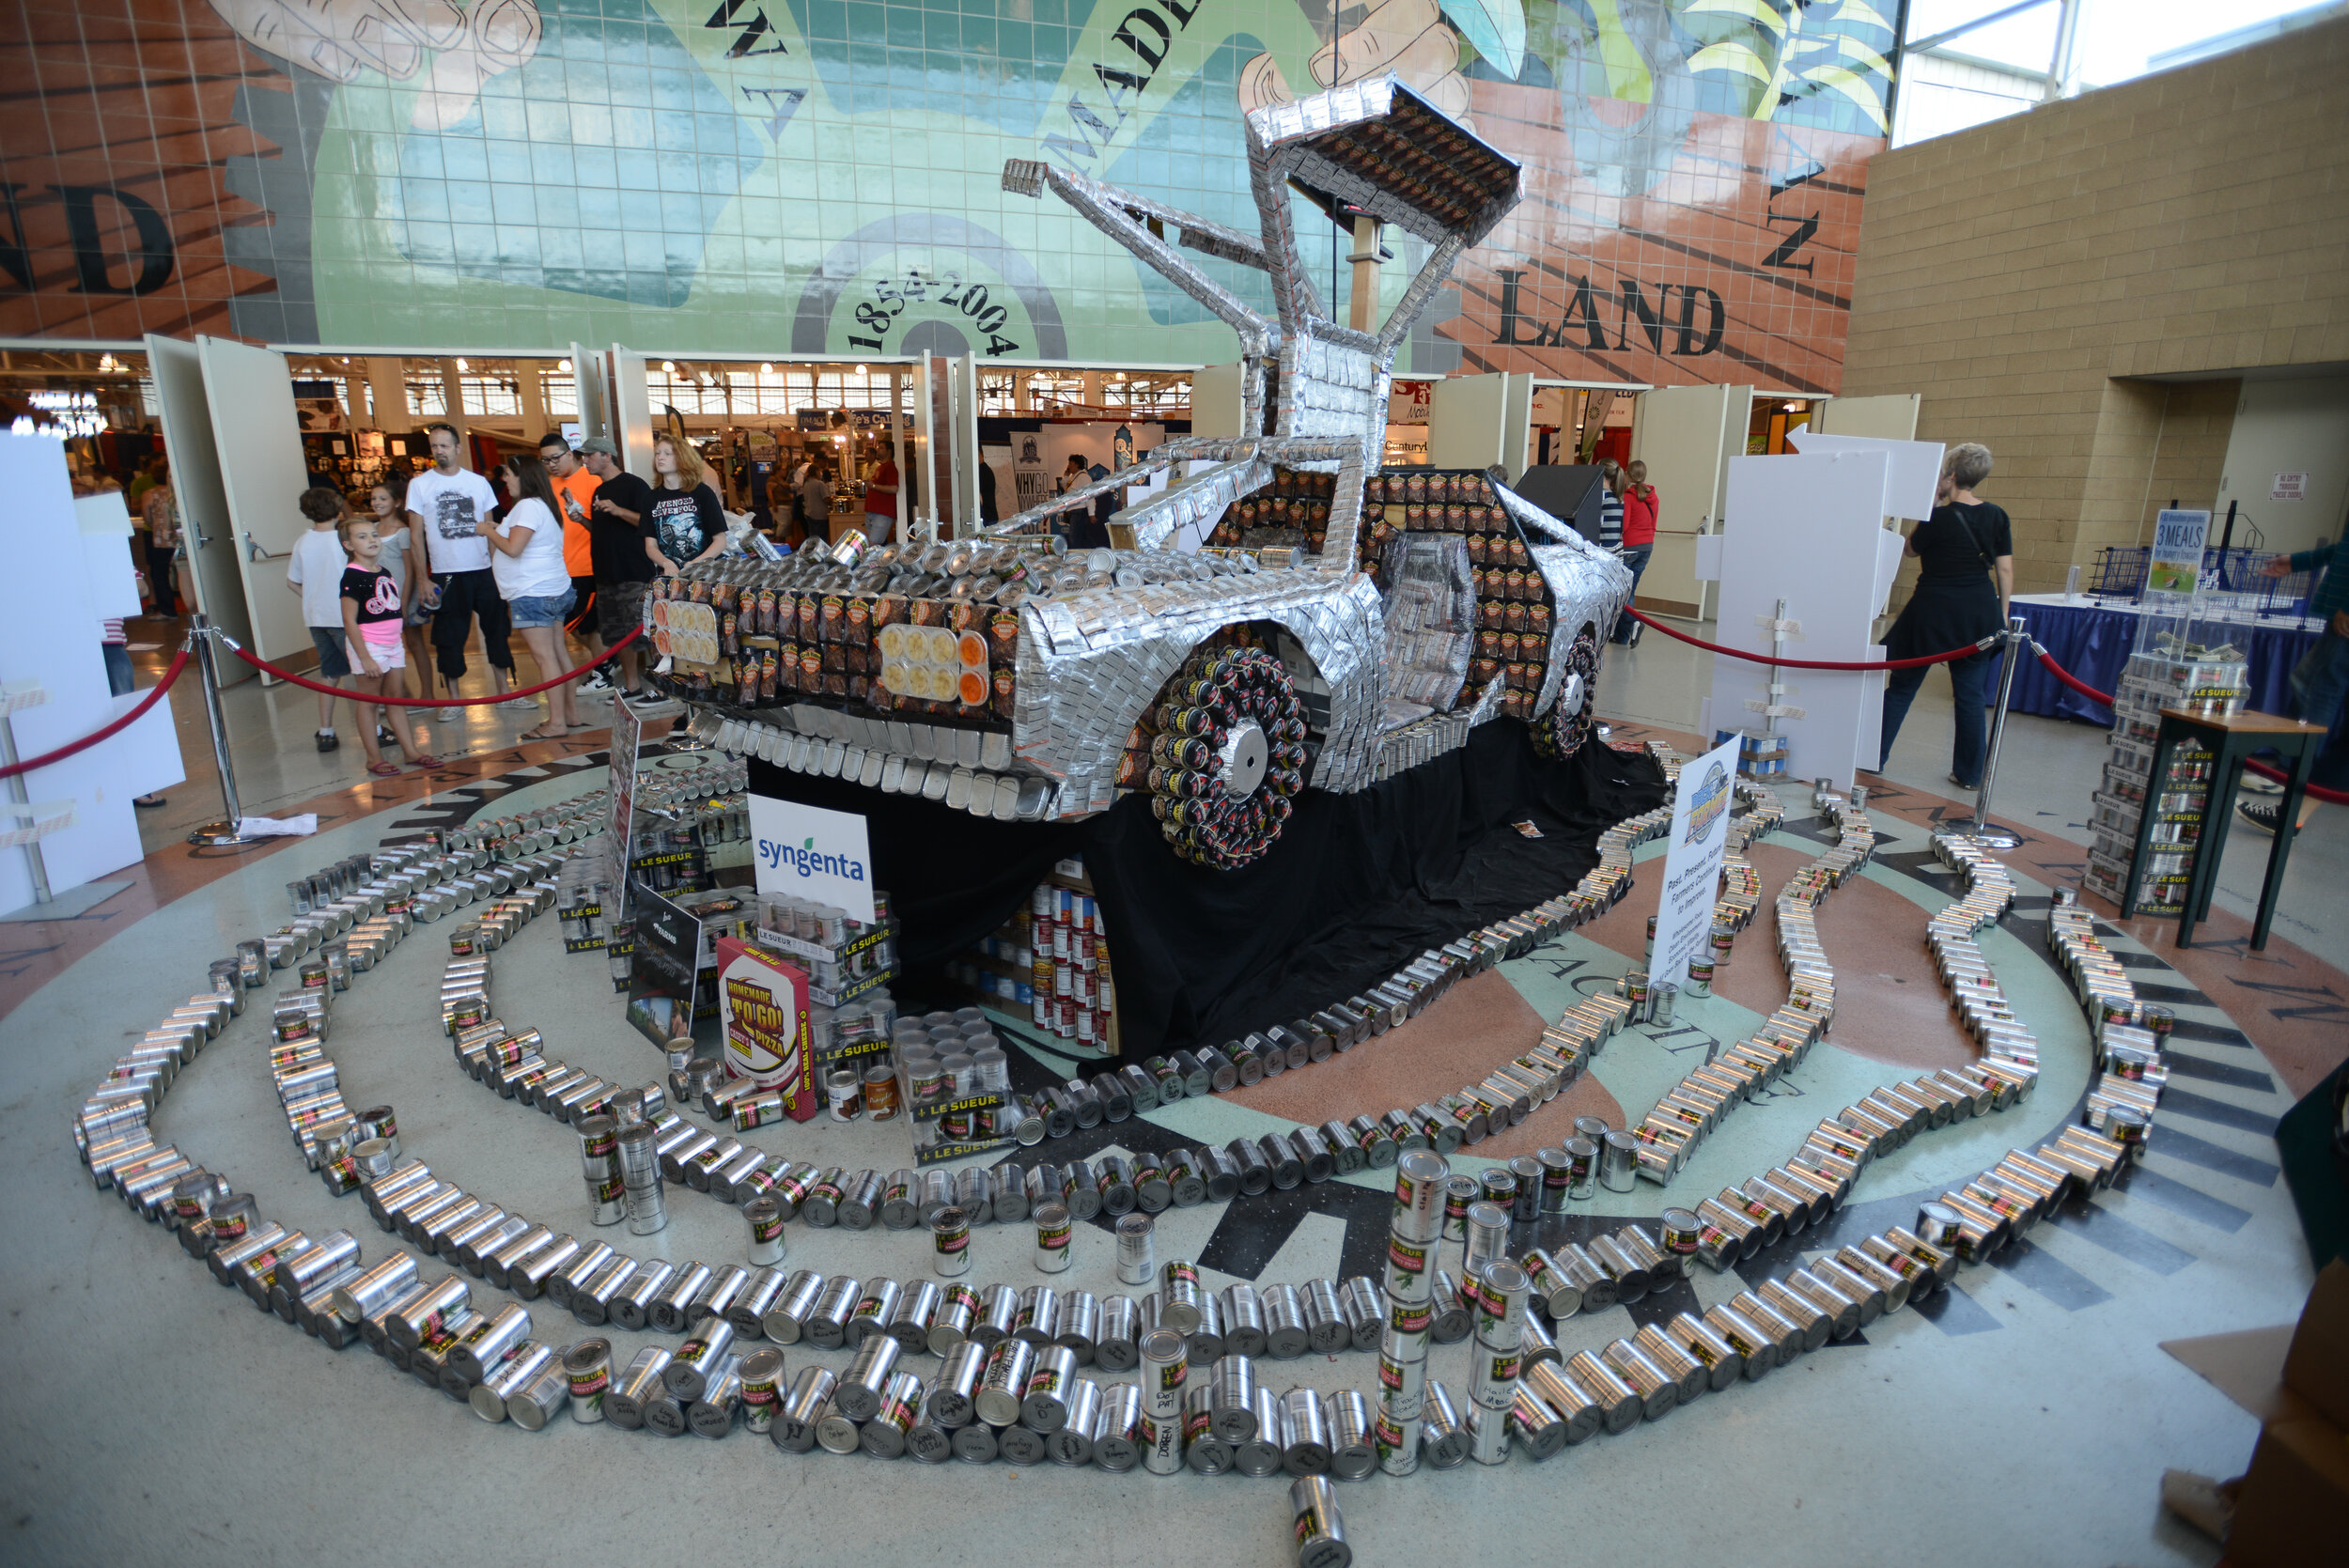 Fairgoers marveled at The Delorean constructed completely out of canned goods in Iowa FFP’s 2012 “Back to the Farmer” themed display.